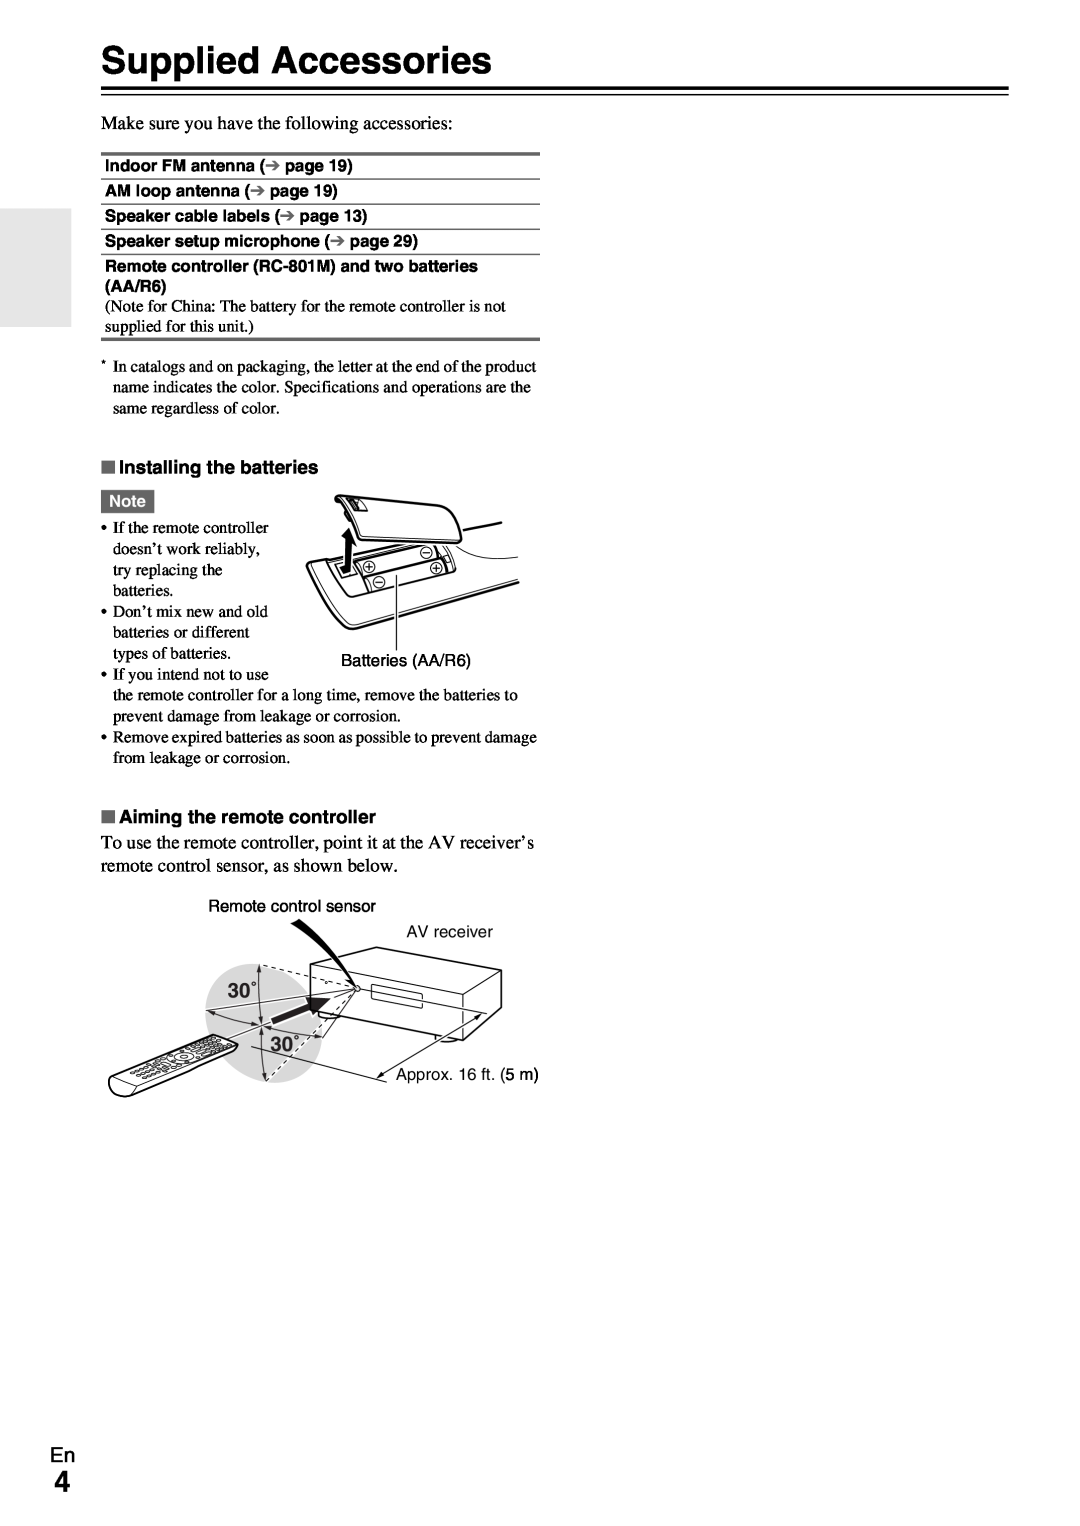 Onkyo HT-RC360 instruction manual Supplied Accessories, Installing the batteries, Aiming the remote controller 